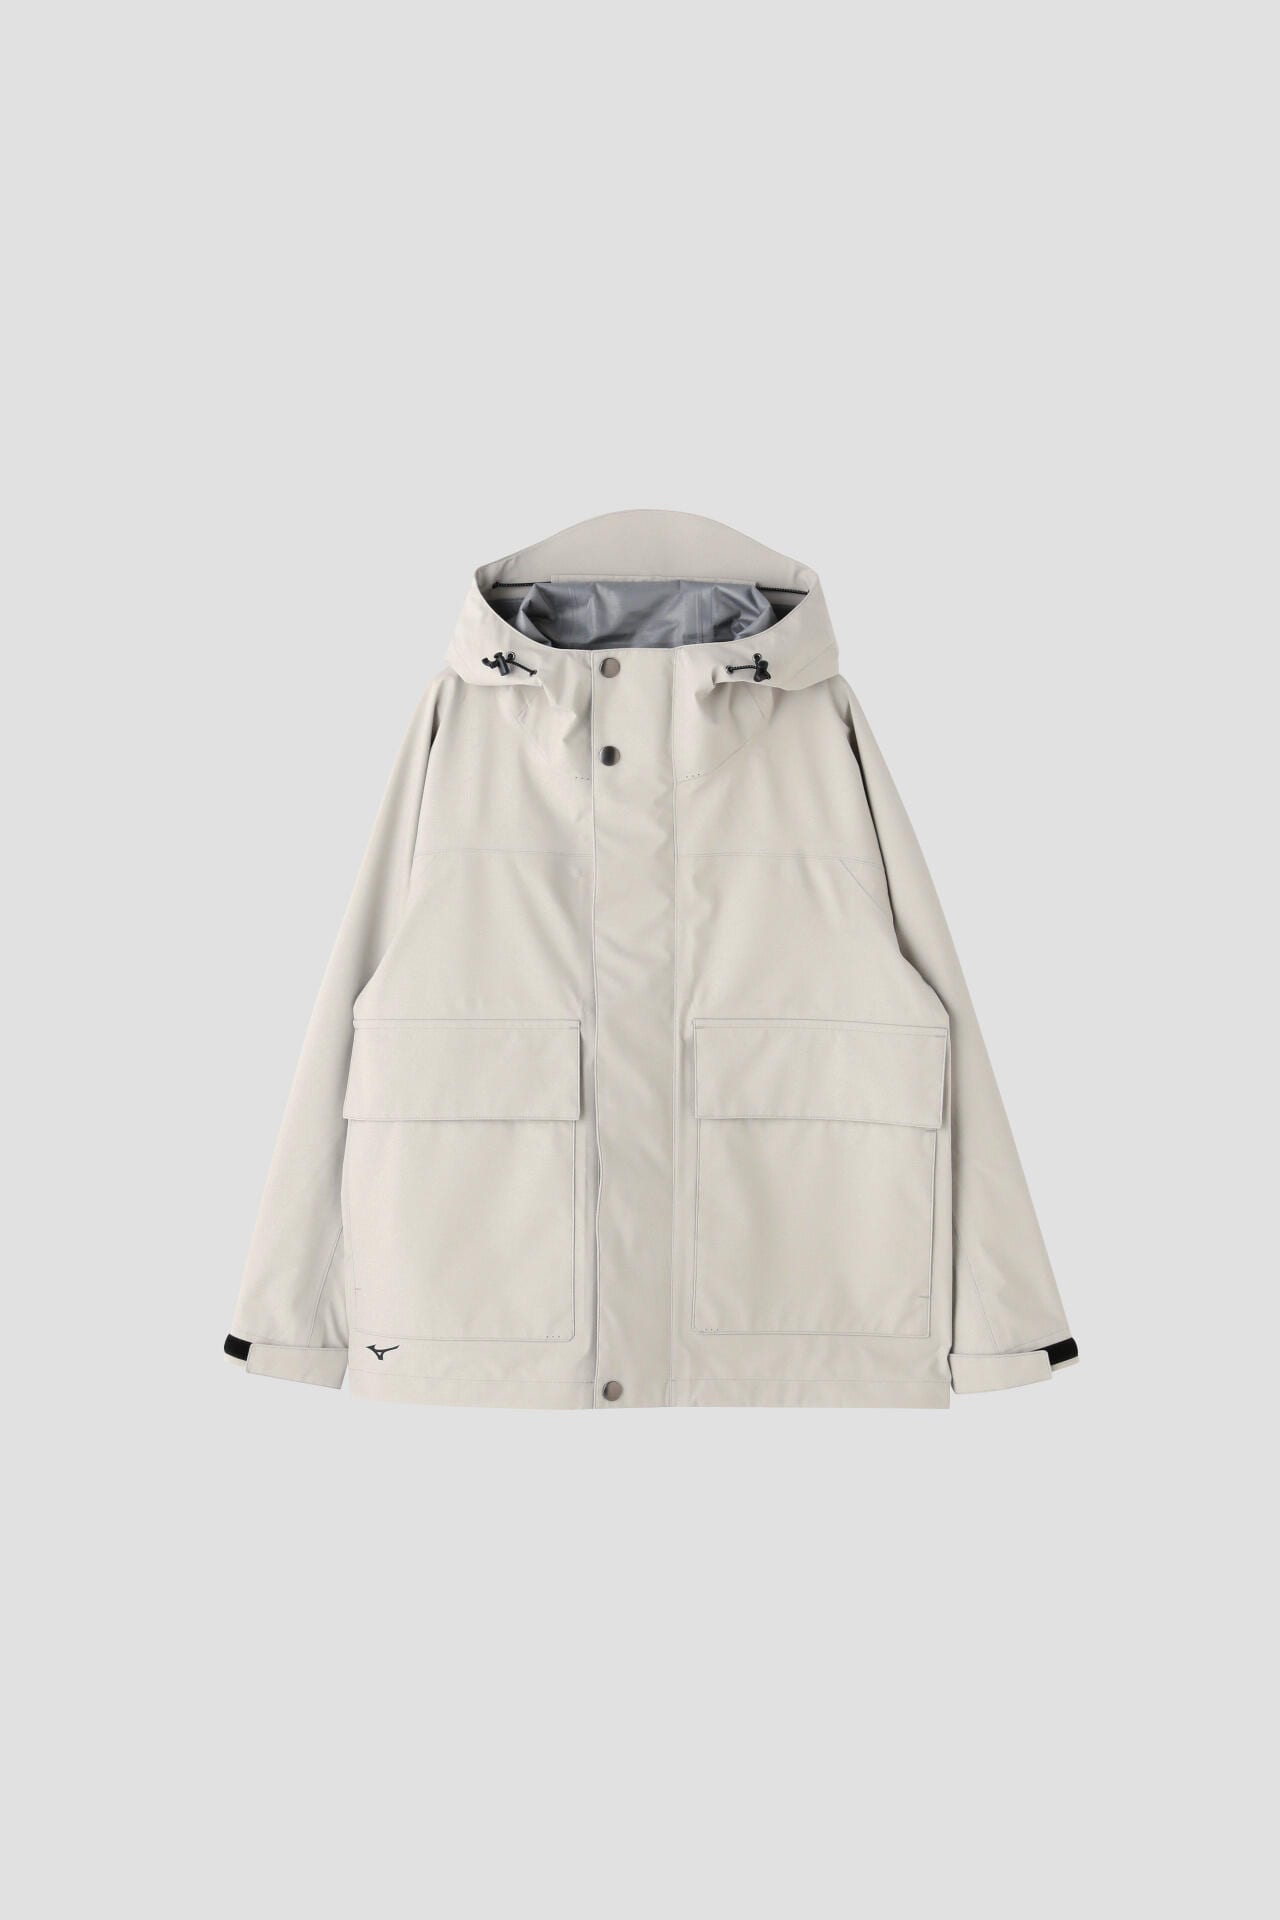 GORE-TEX WATER PROOFED POLYESTER POPLIN | MARGARET HOWELL ...